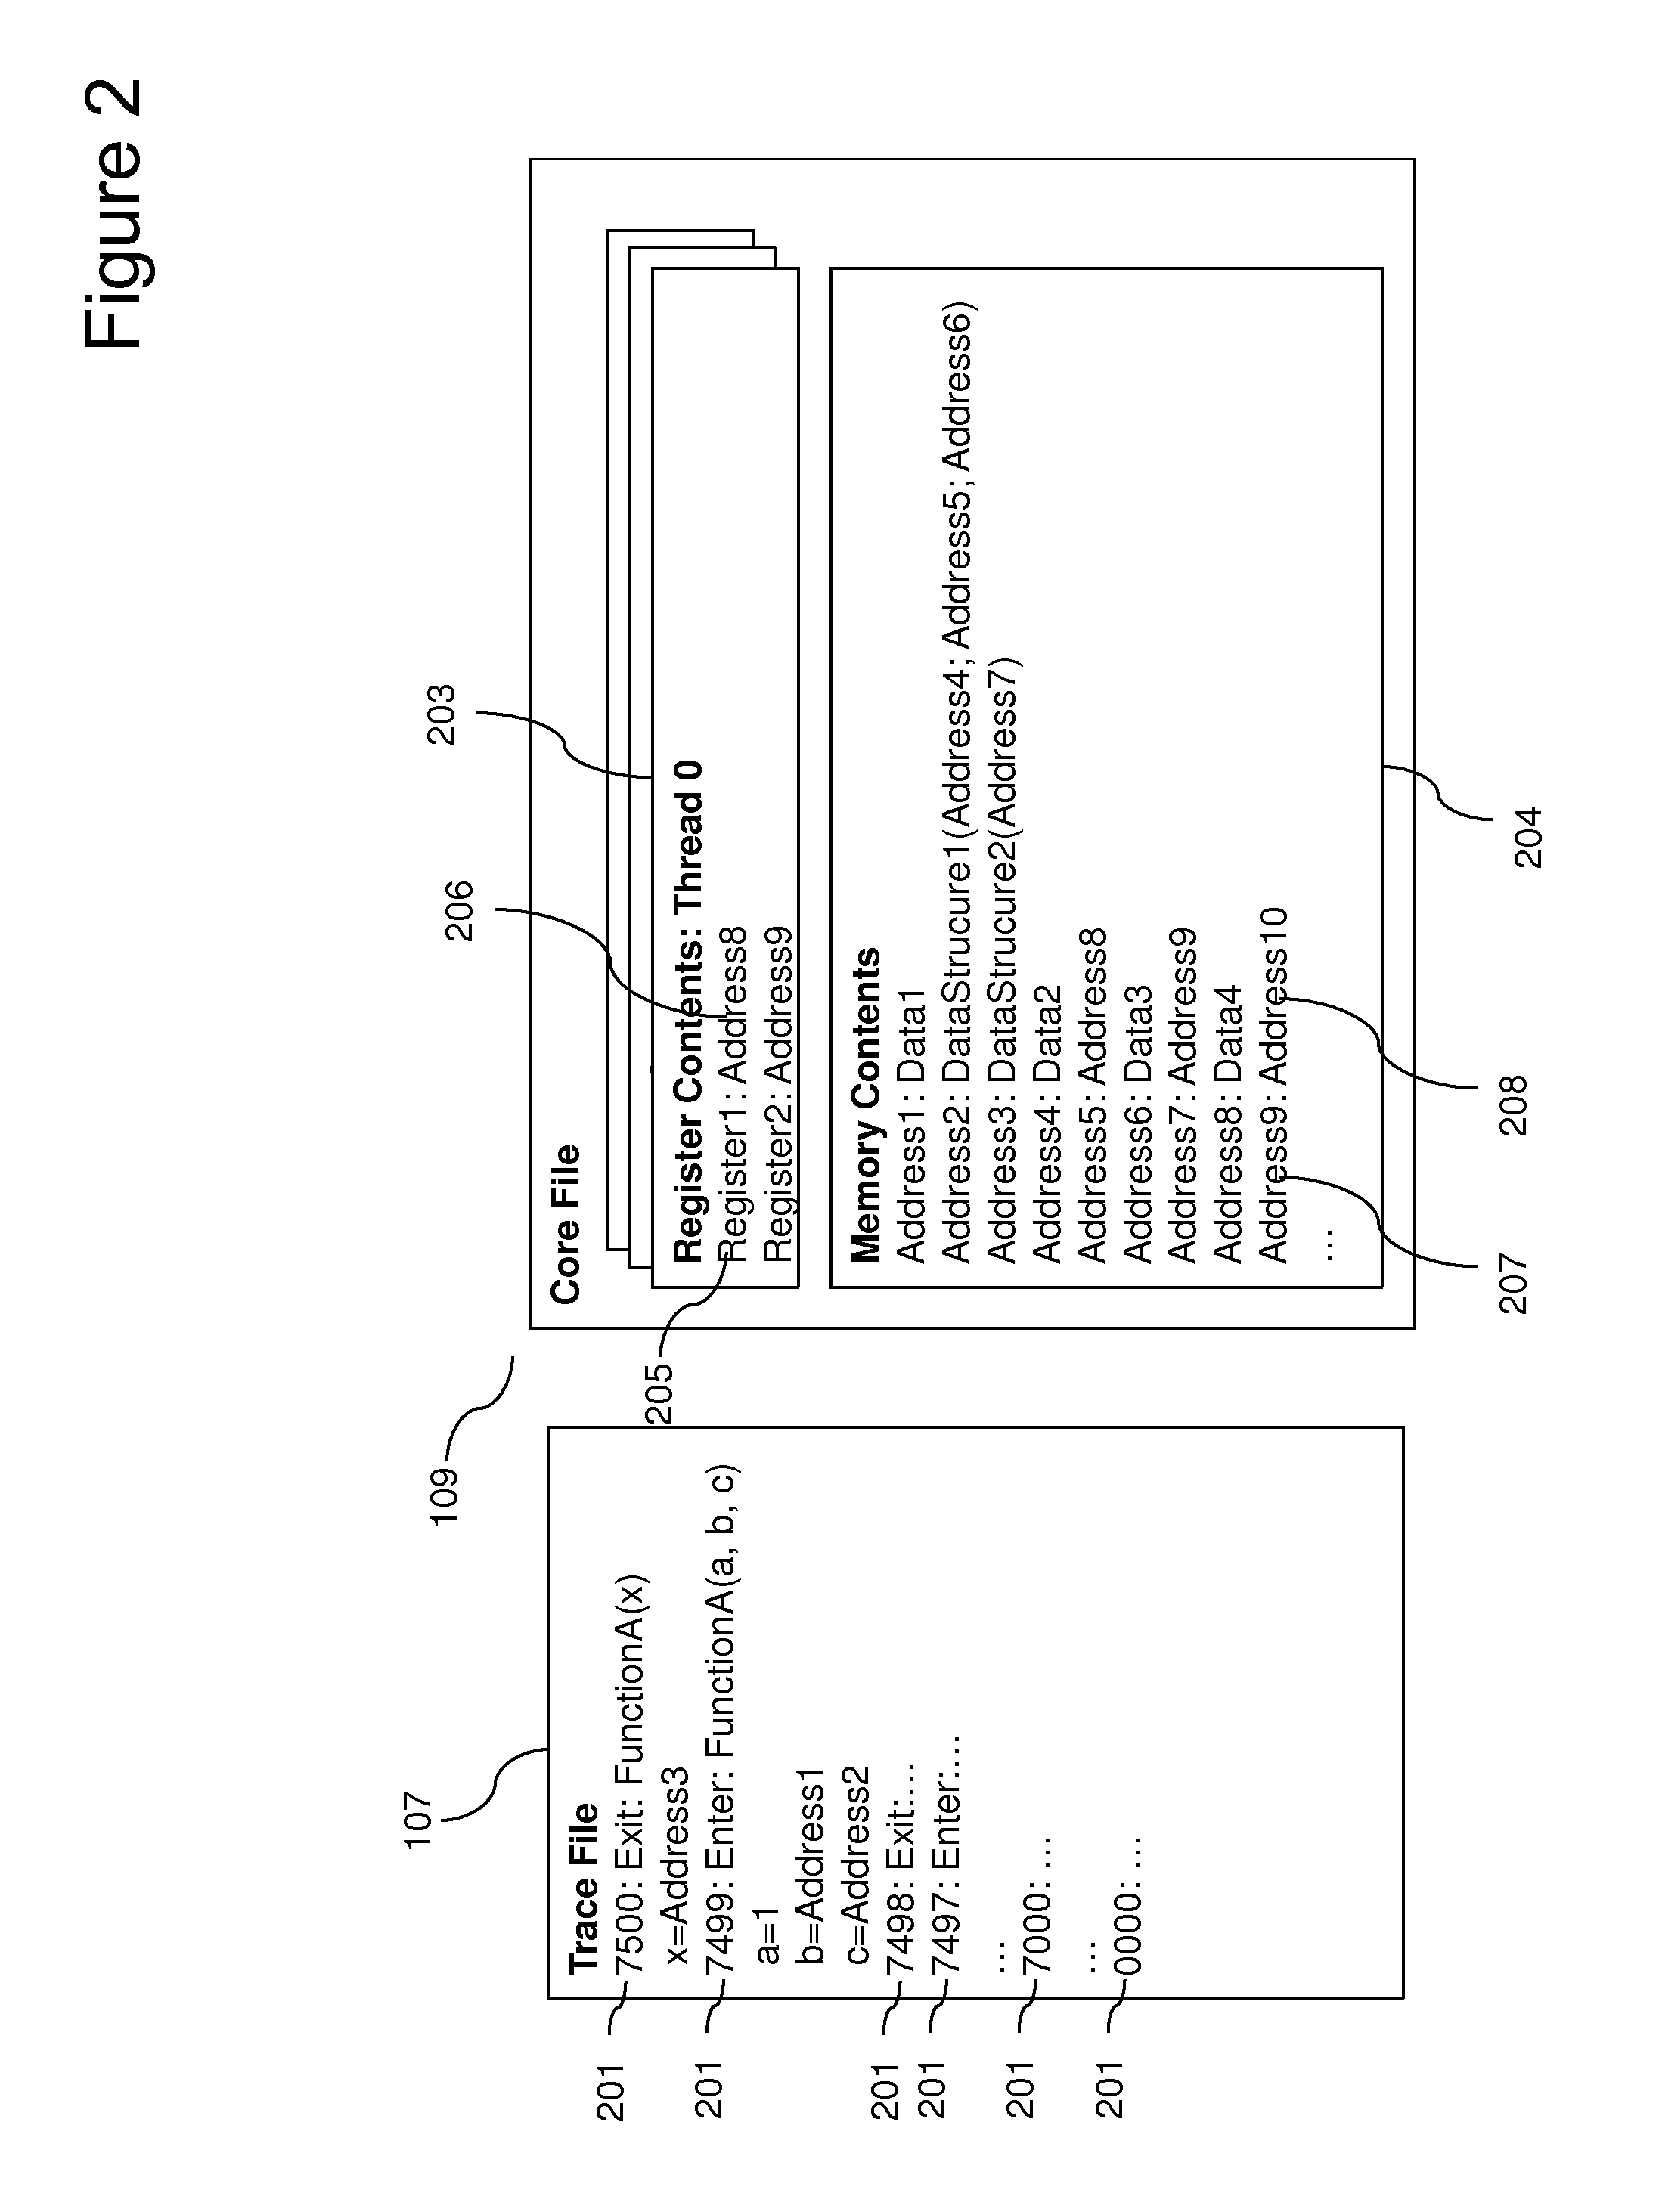 Processing core data produced by a computer process